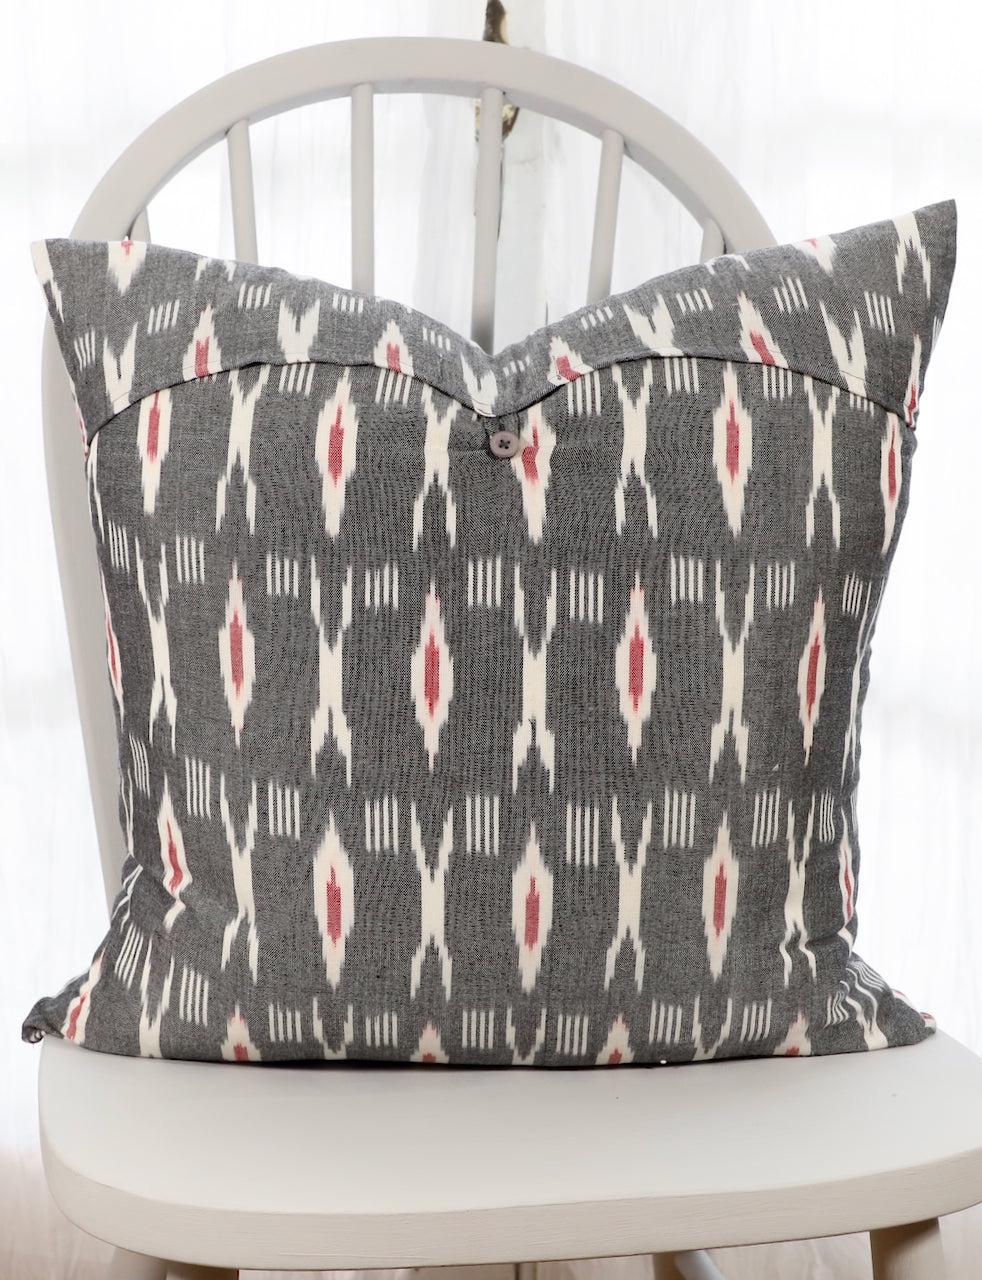 XO Grey &amp; Red Throw Pillow Cover